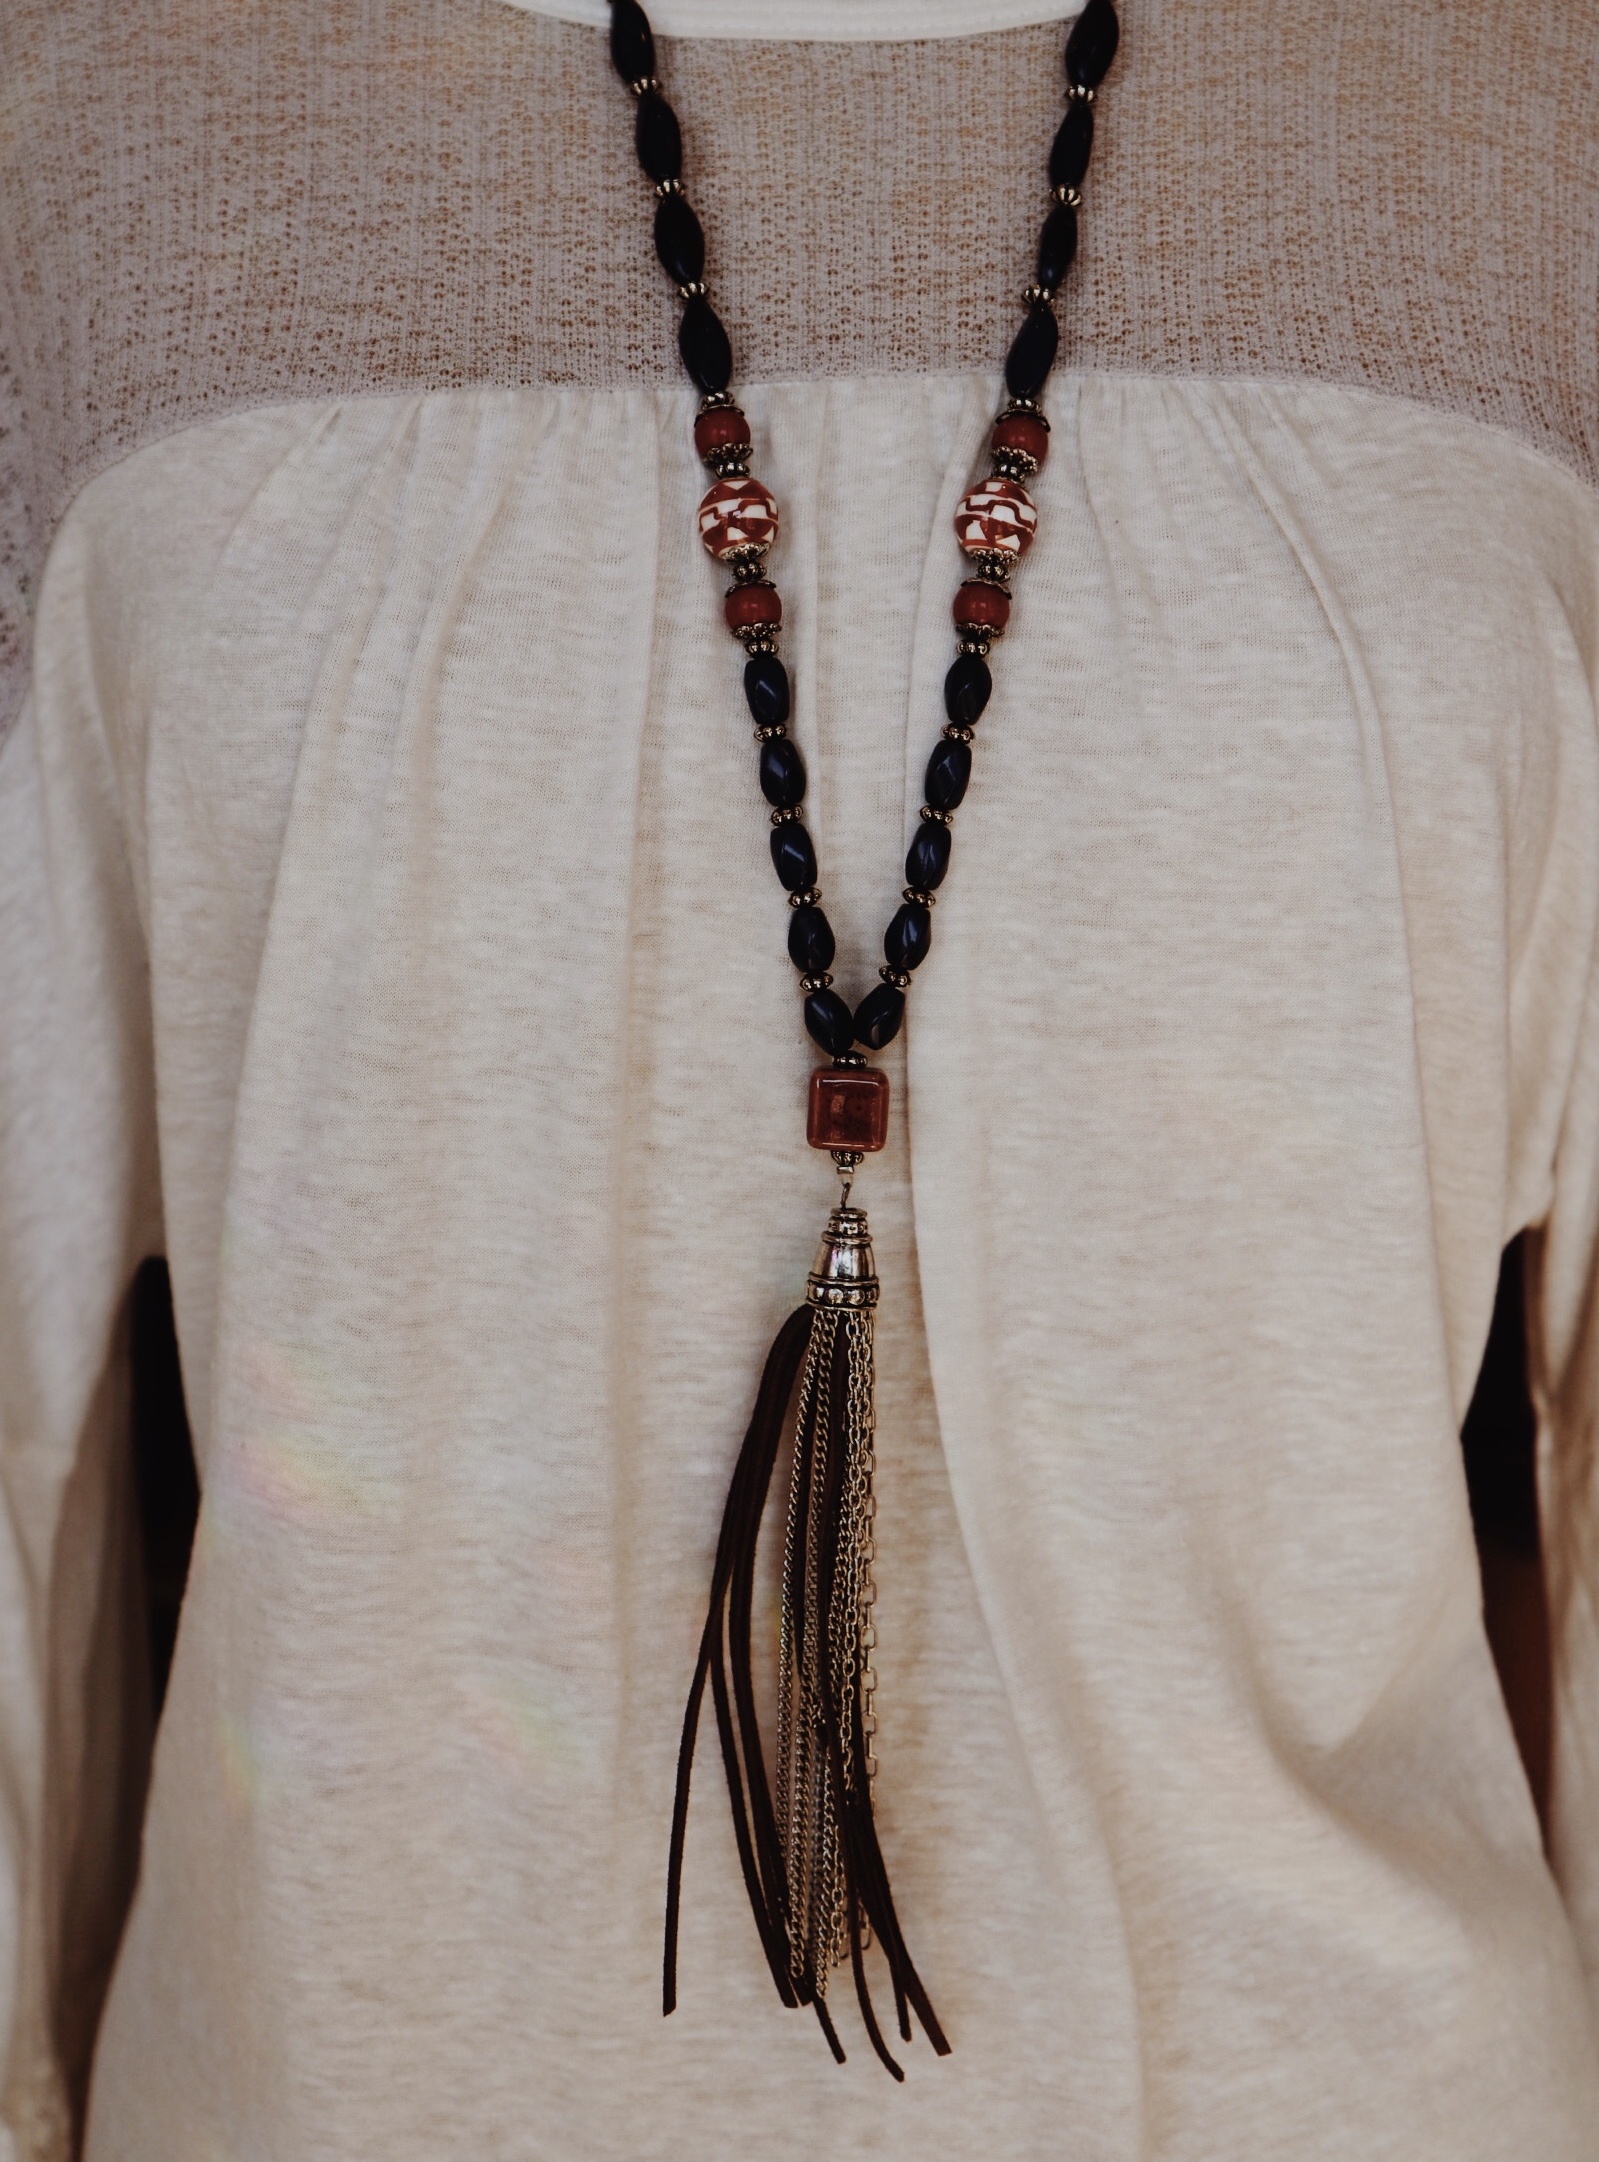 Navy Blue Tassel Necklace with blue and red beaded 16 inch chain and 6 inch metal chain and leather tassles.